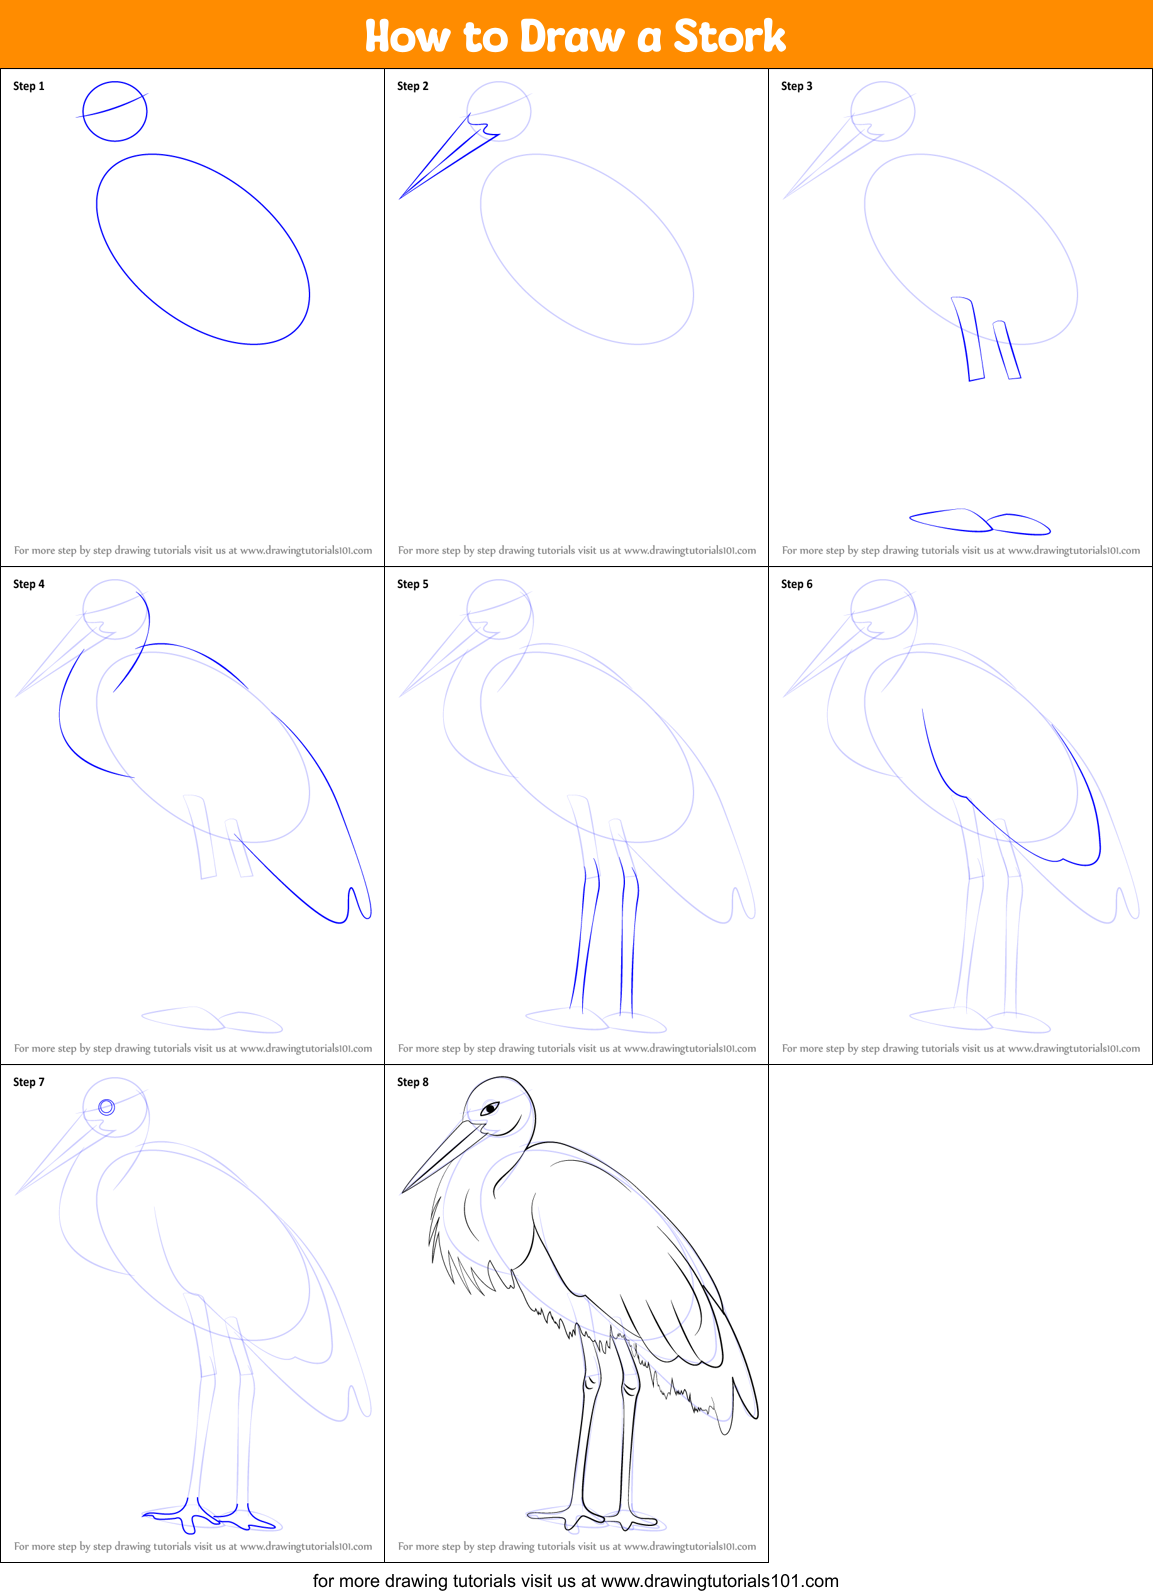 How to Draw a Stork printable step by step drawing sheet